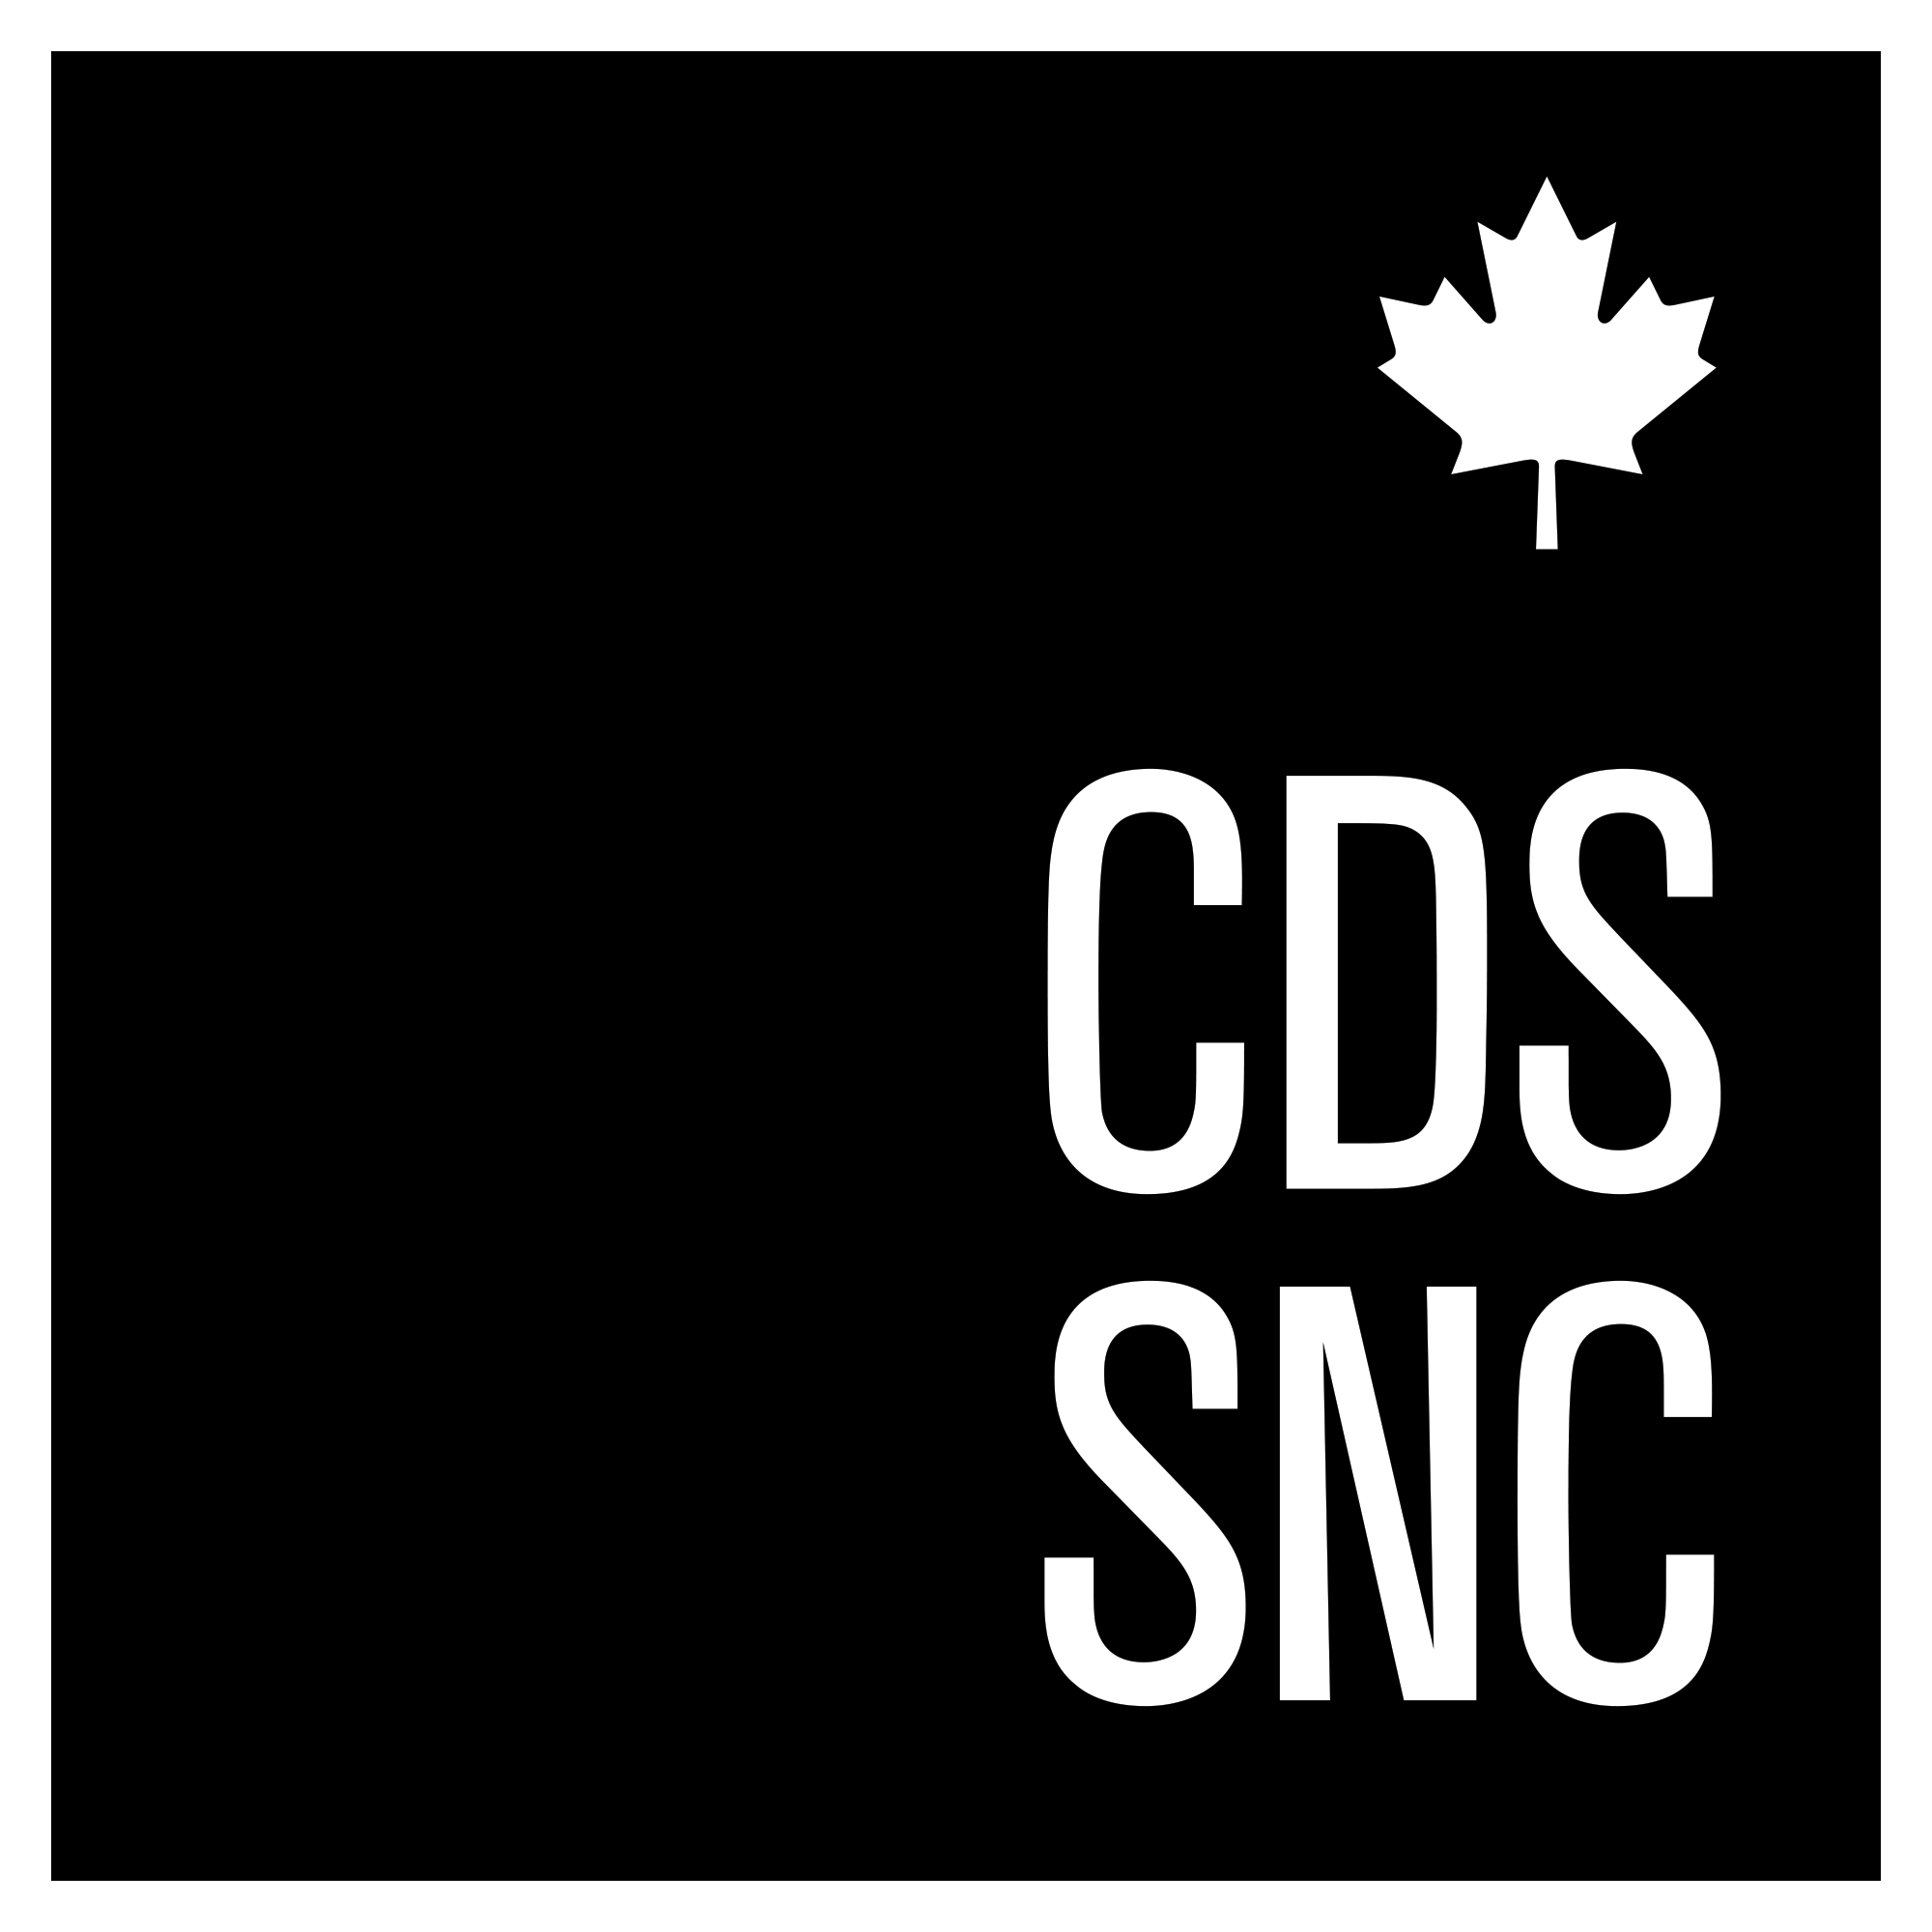 Logo of the Canadian Digital Service